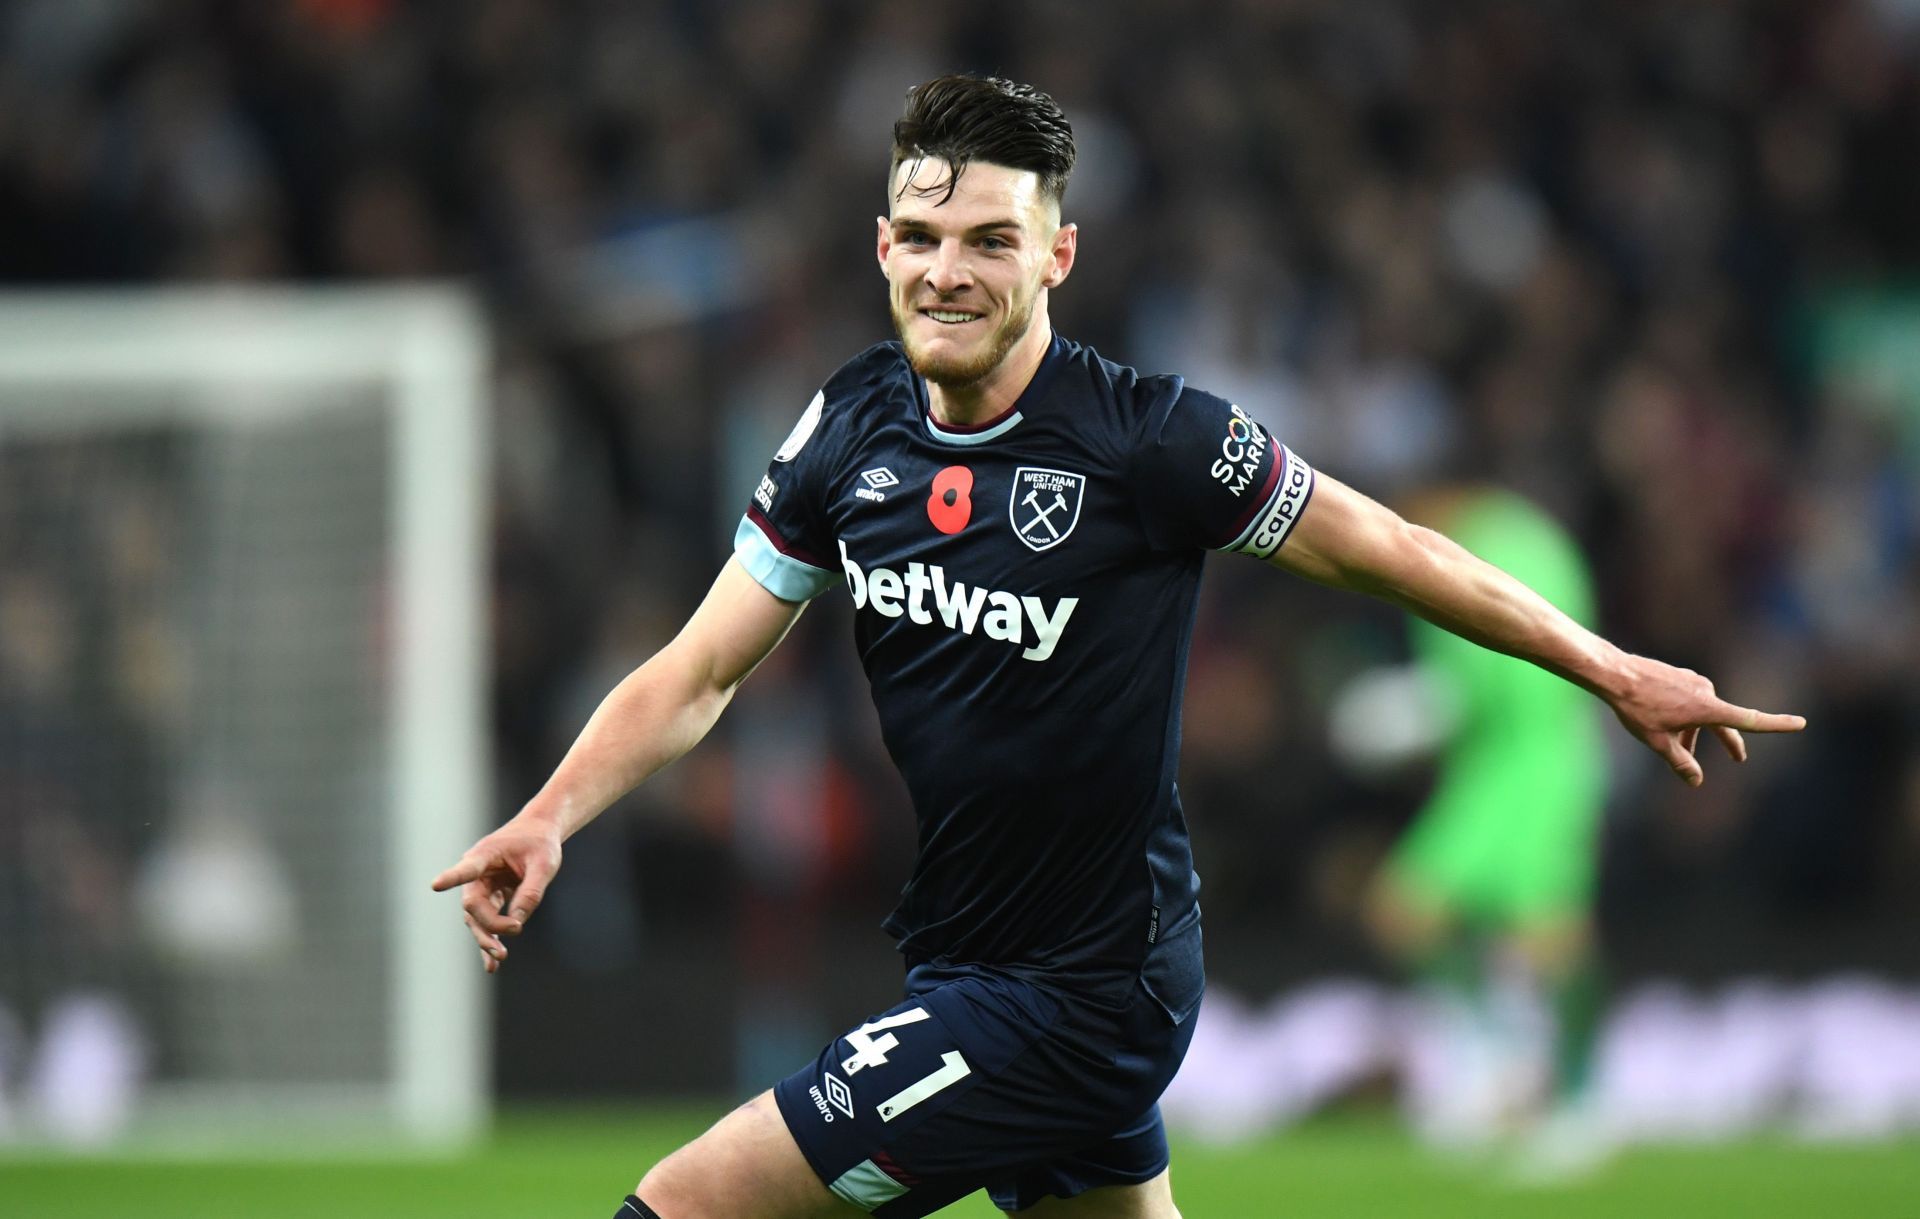 The West Ham midfielder is firing on all cylinders right now